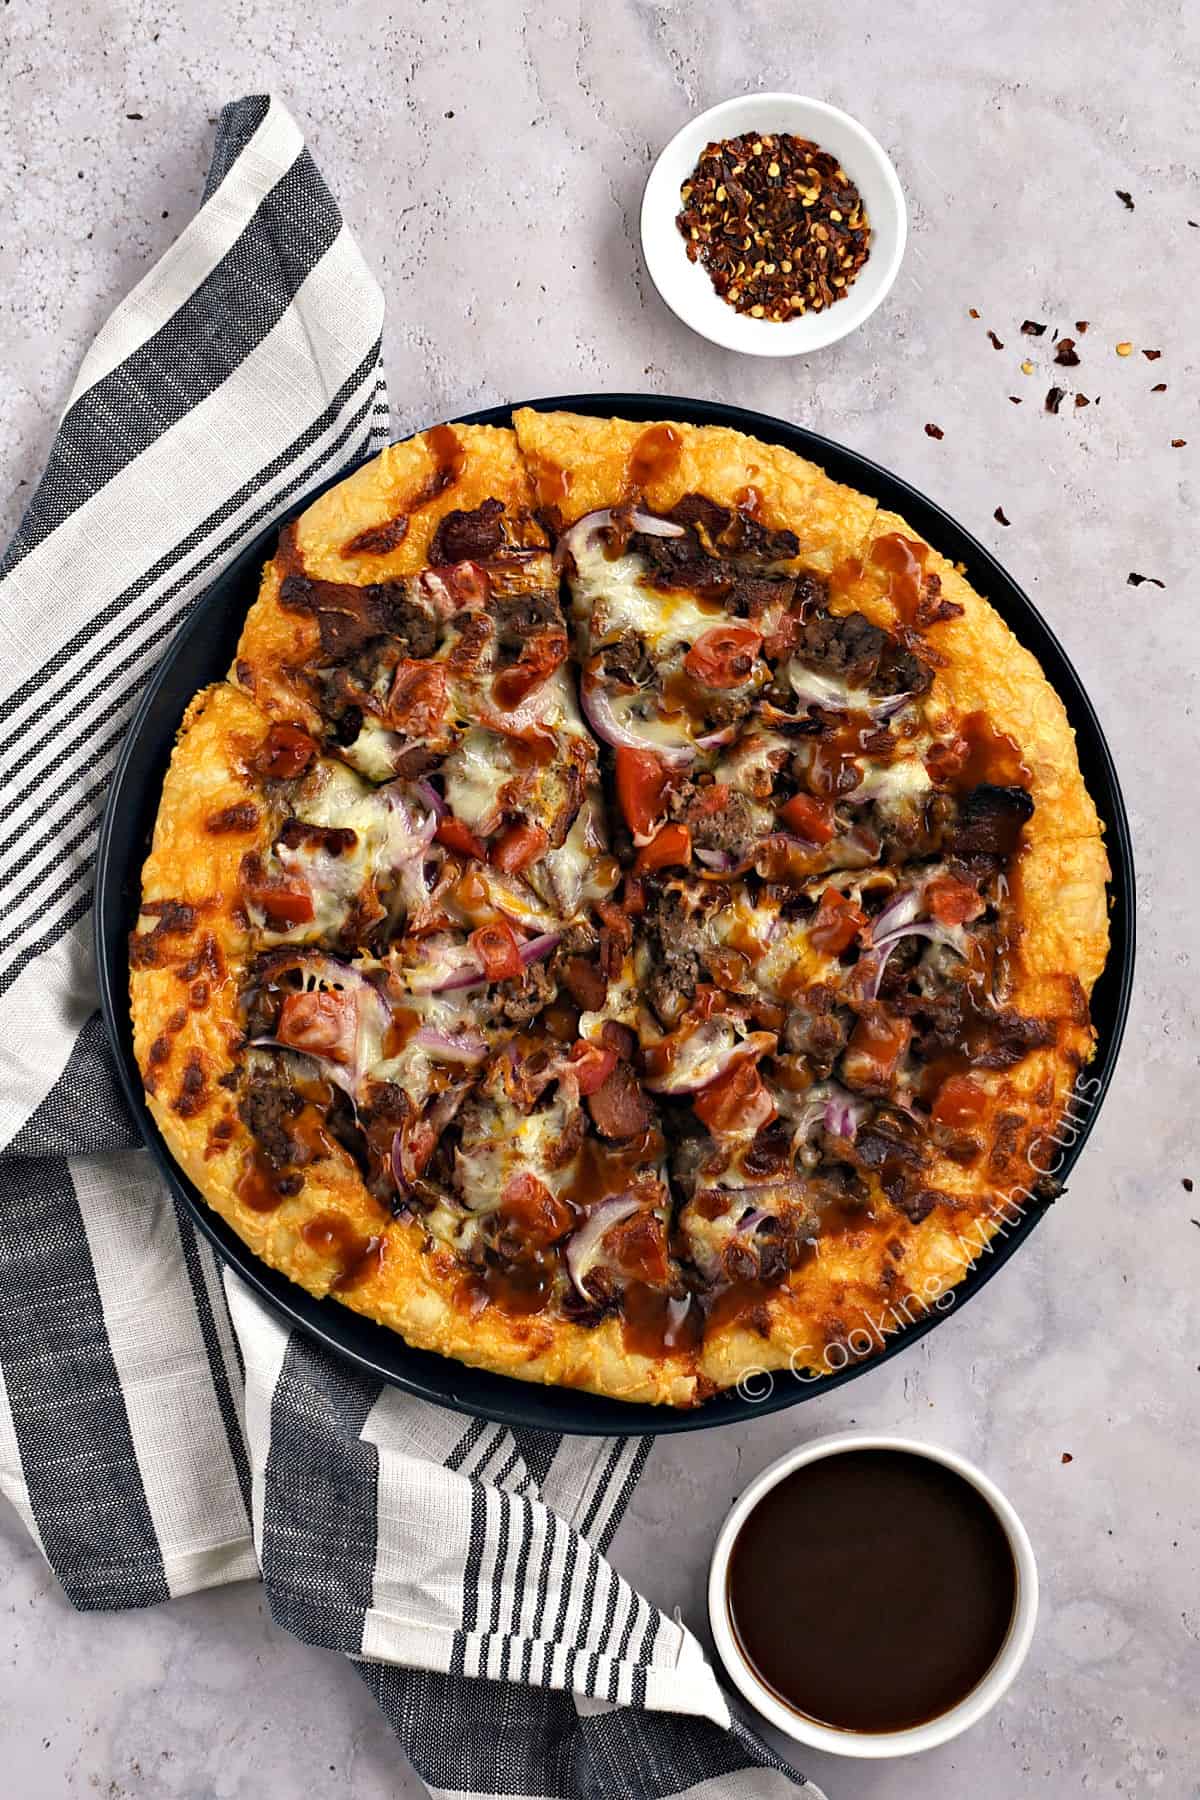 Looking down on a sliced bacon cheeseburger pizza cut into eight slices with chili flakes and barbecue sauce on the side.